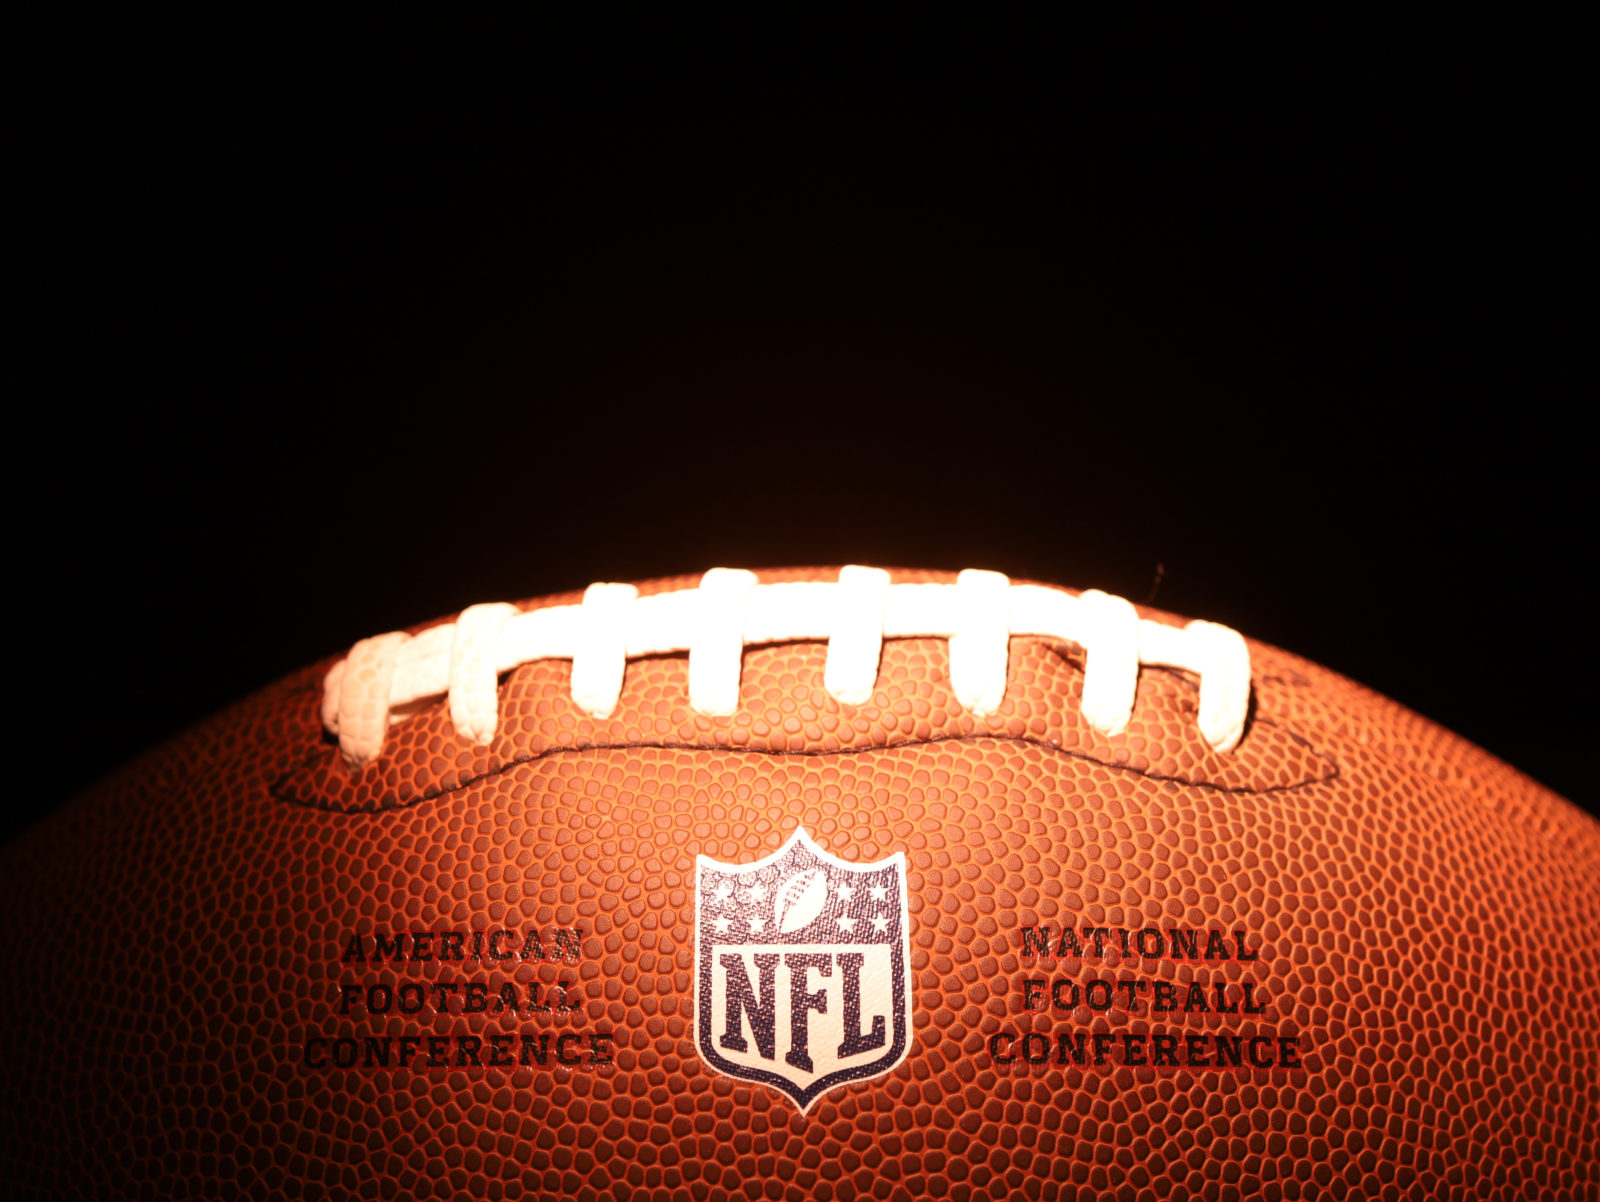 American football ball with emblem NFL. NATIONAL FOOTBALL LEAGUE. USA sports. Moscow, Russia - January 31, 2023. 2023/02/AdobeStock_566479530_Editorial_Use_Only.jpeg 